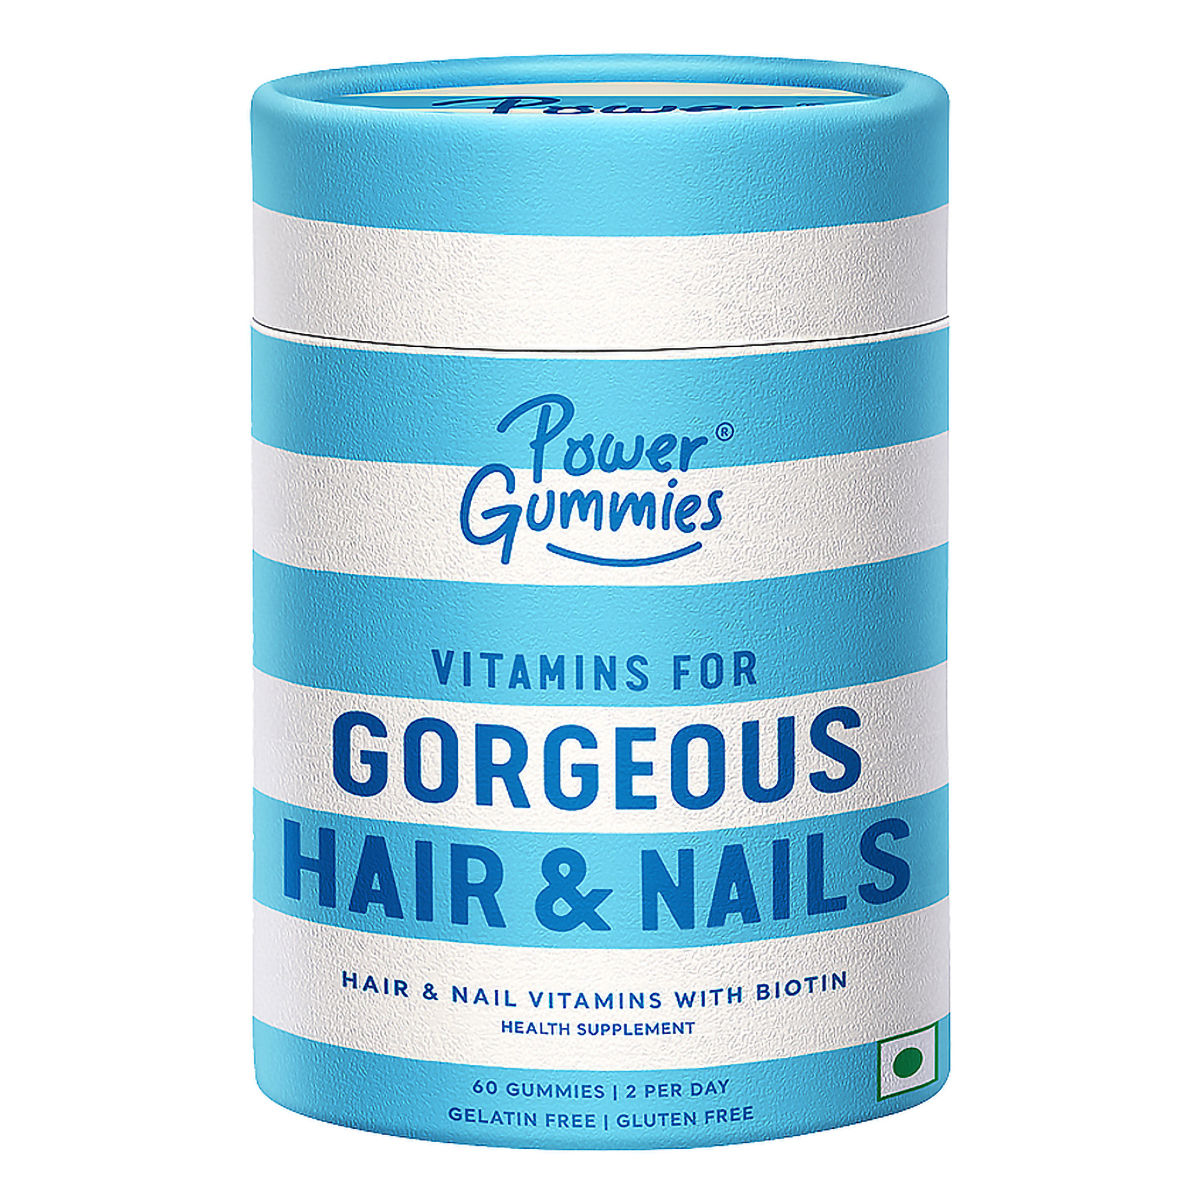 Buy Power Gummies Hair & Nail Vitamins with Biotin Mixed Berry Flavour Gummies, 60 Count Online